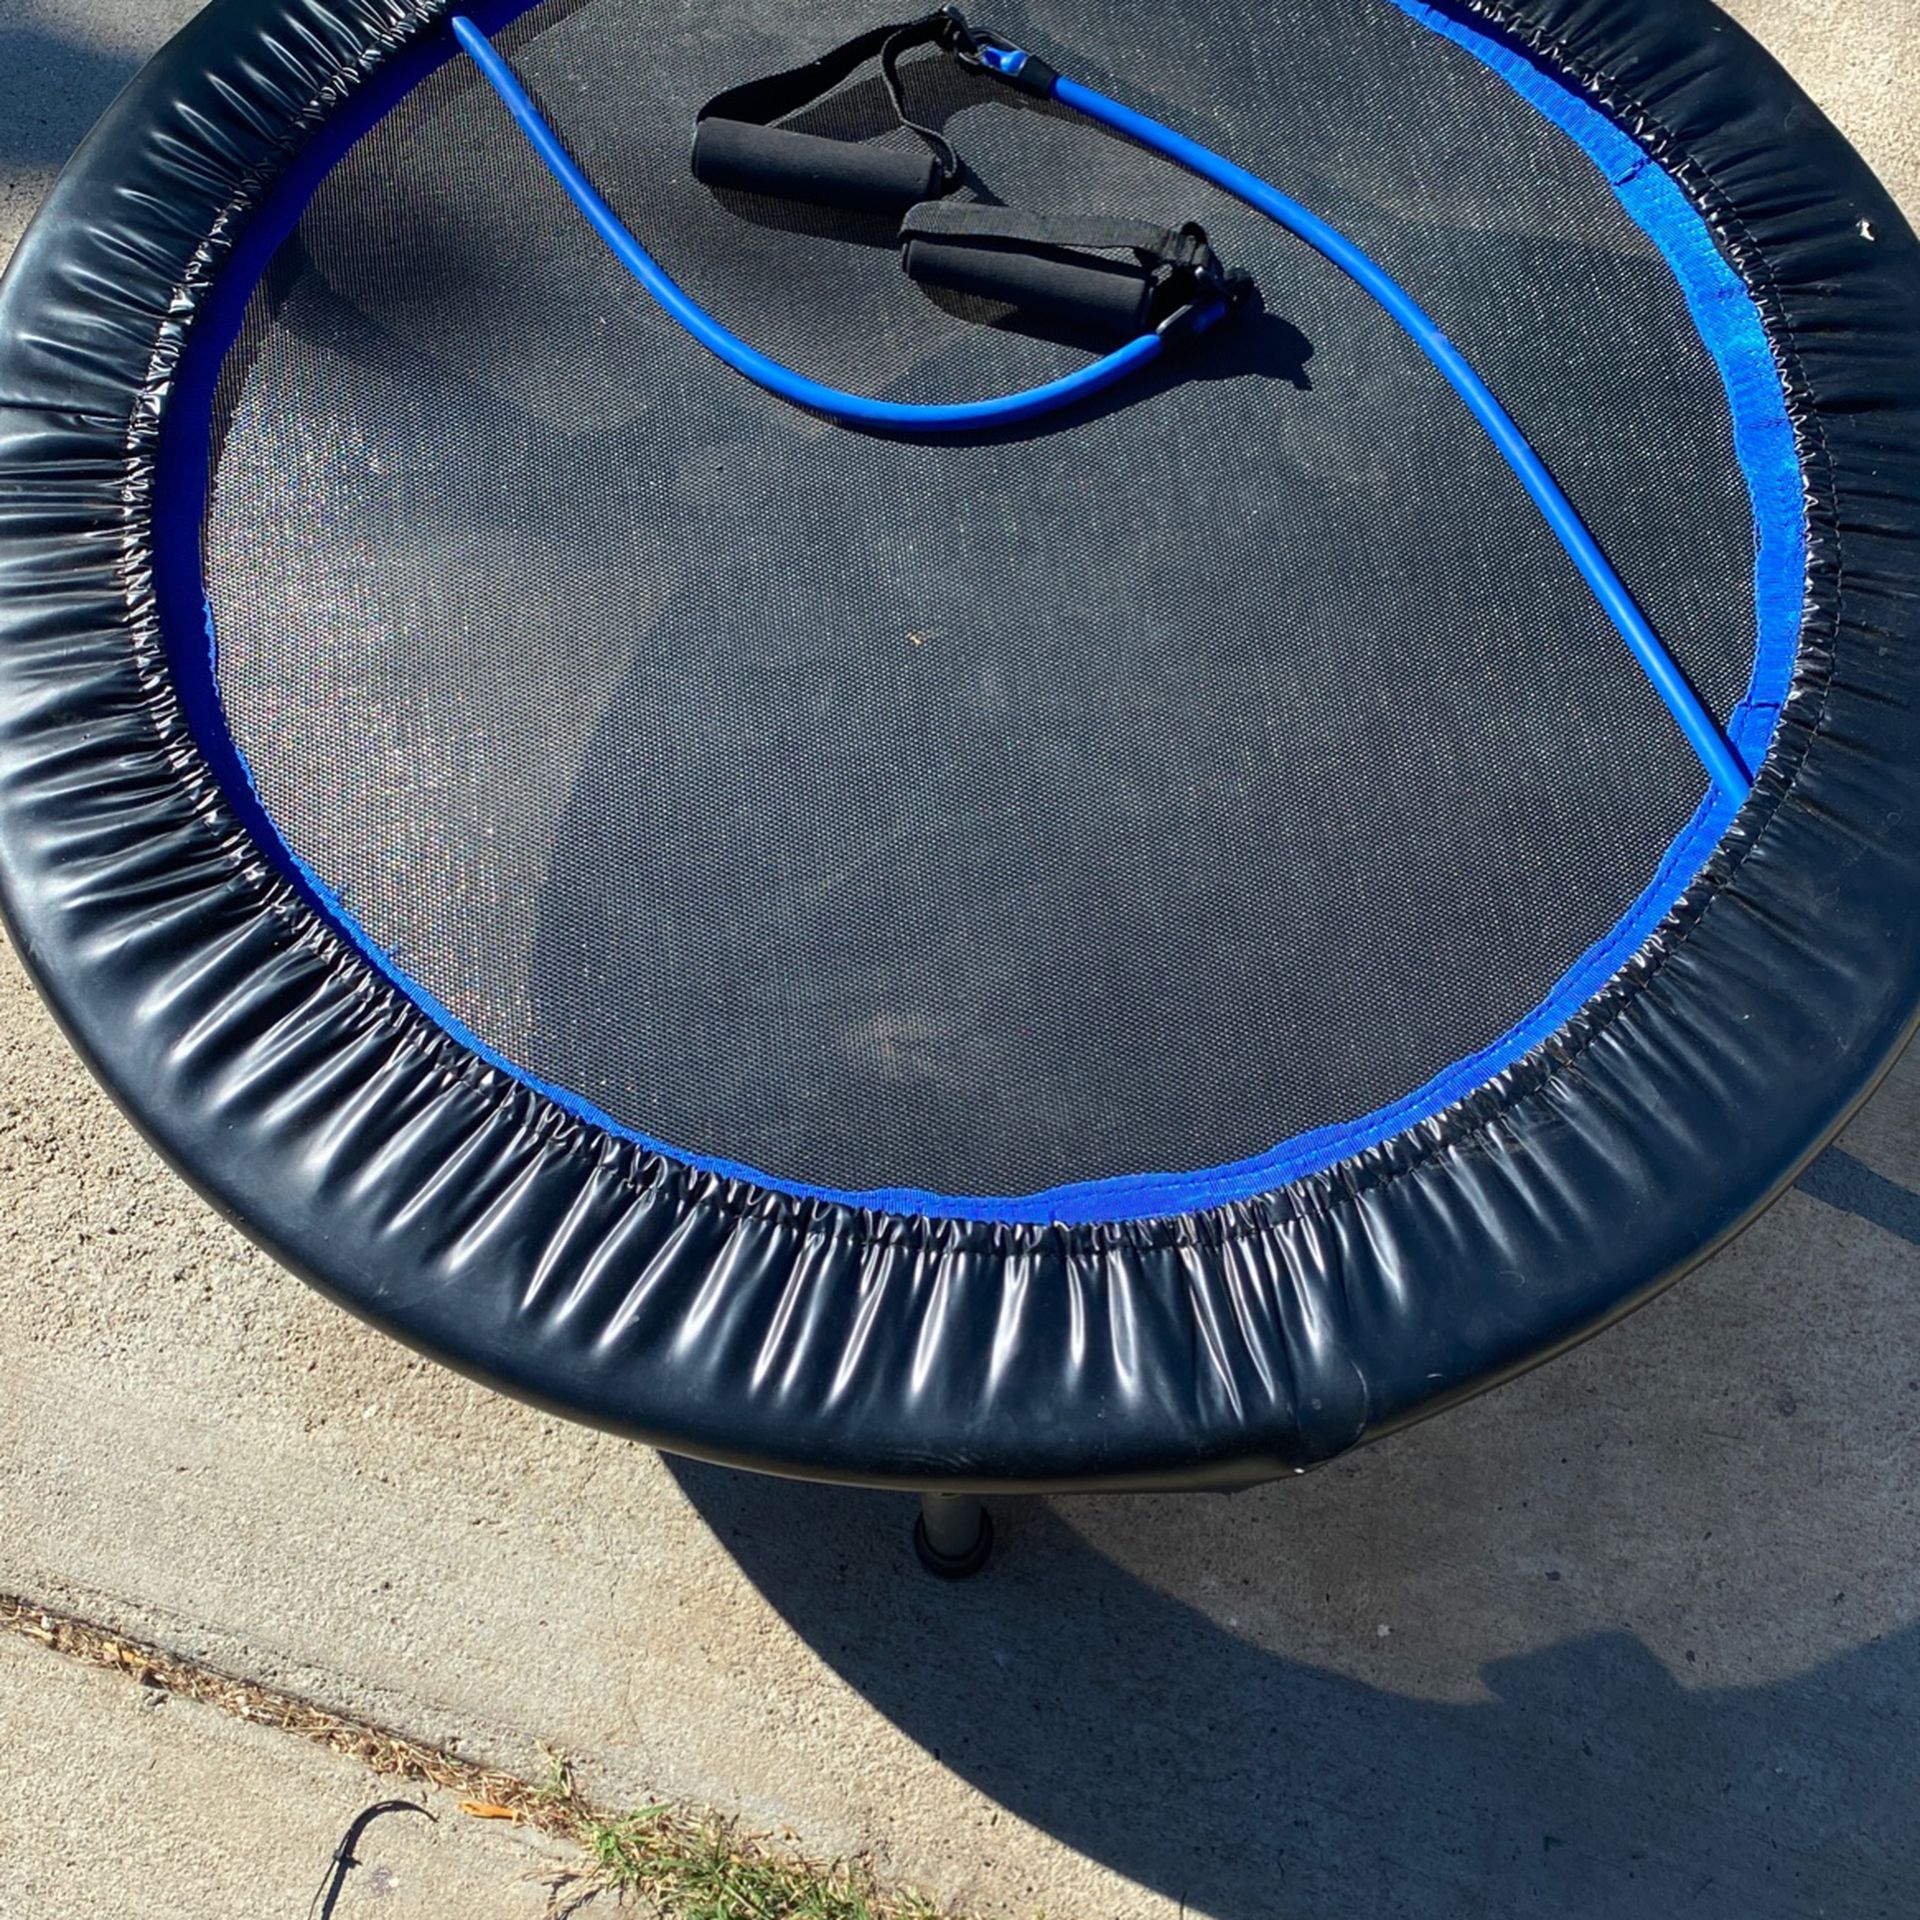 Work out trampoline